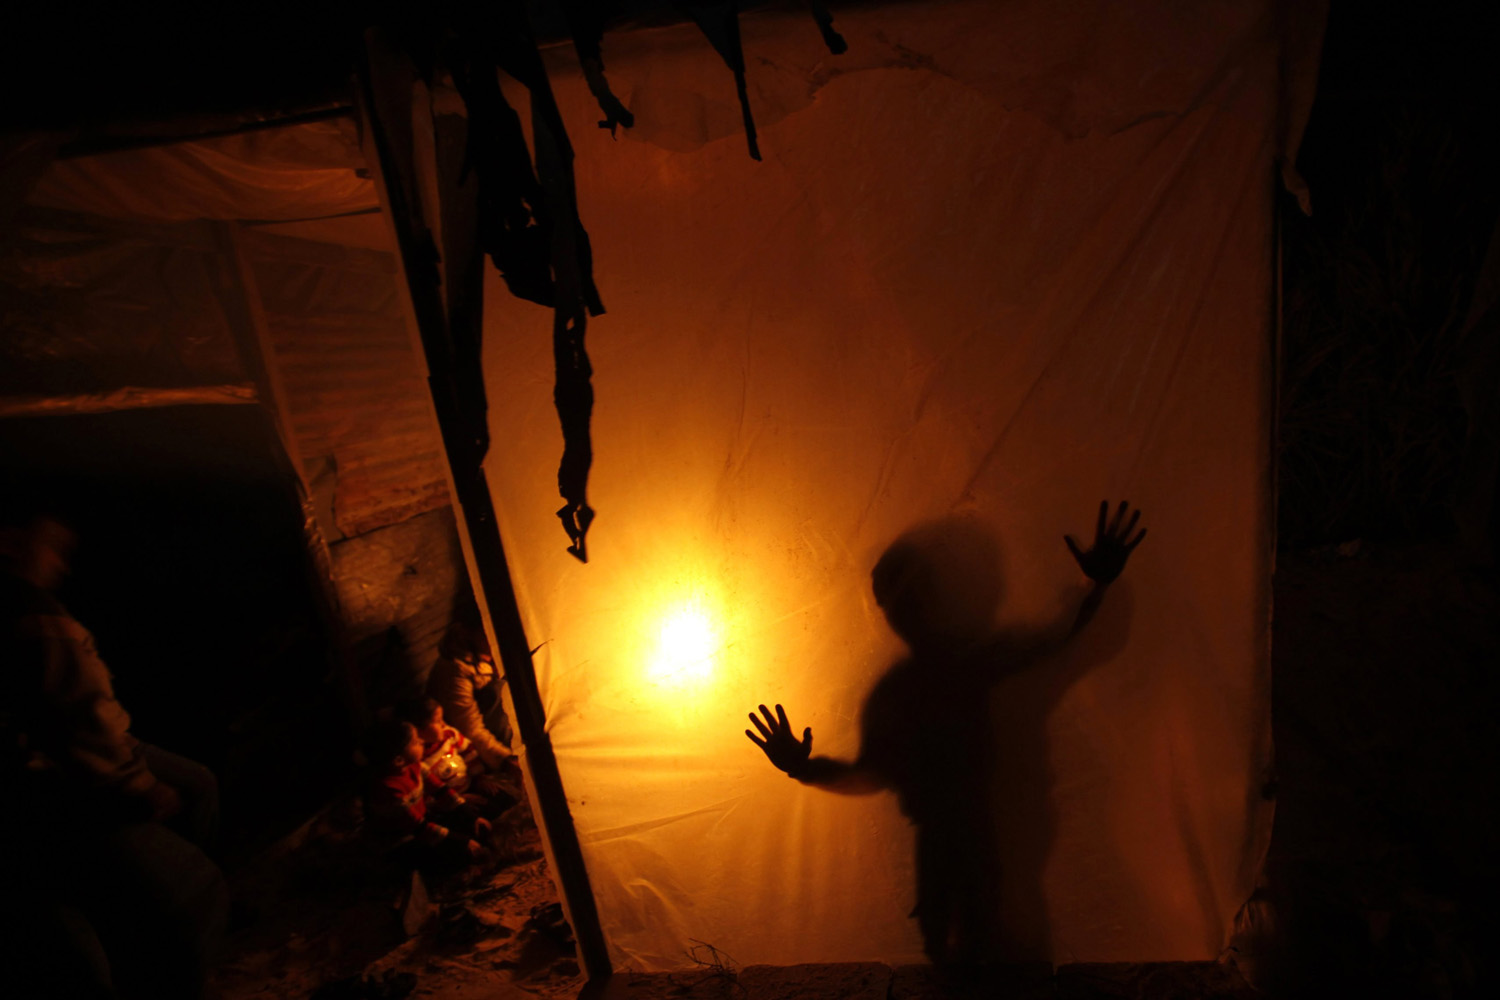 A Palestinian family sits inside their makeshift house during power cuts in Khan Younis in Gaza Strip